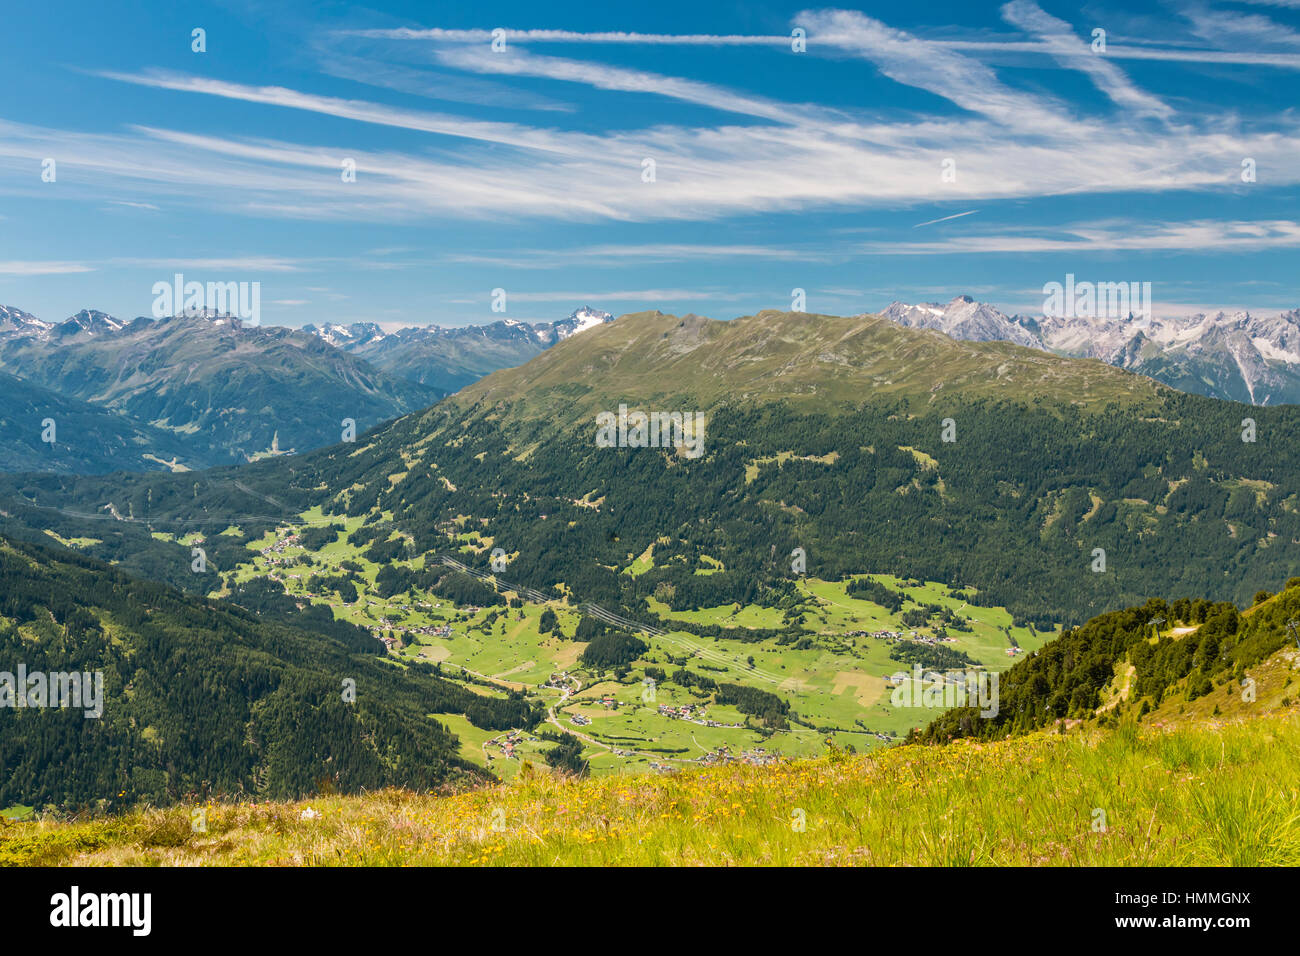 Summer view to the villages Wenns and Jerzens in the Pitztal, Austria with a flower meadow in the foreground Stock Photo